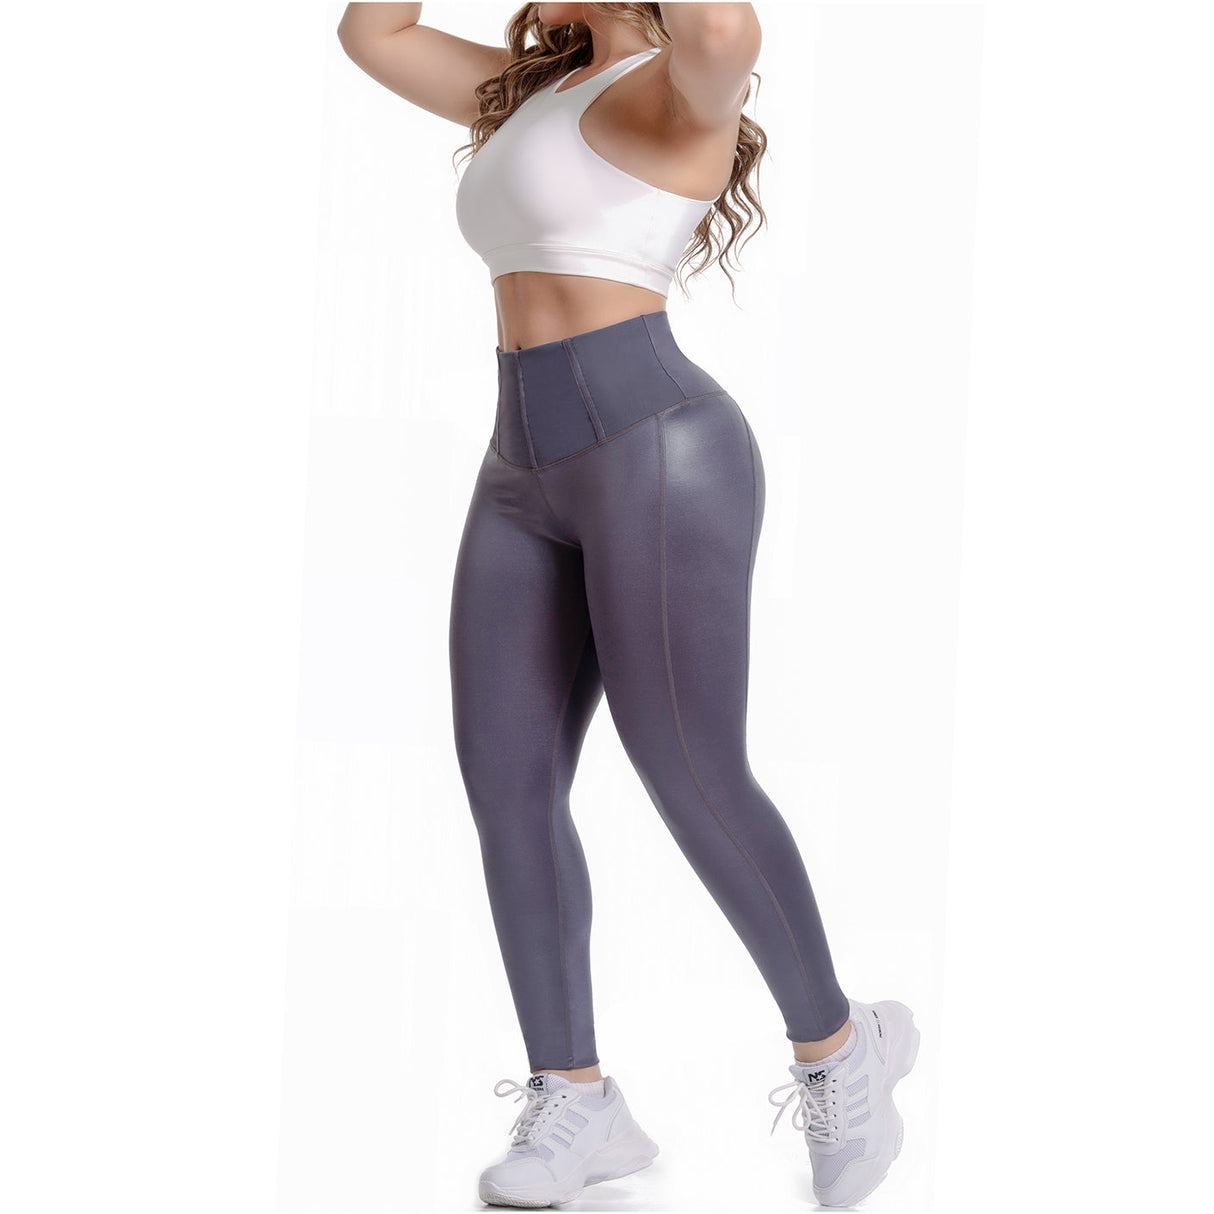 Leggings That Will Cover Your Stomach